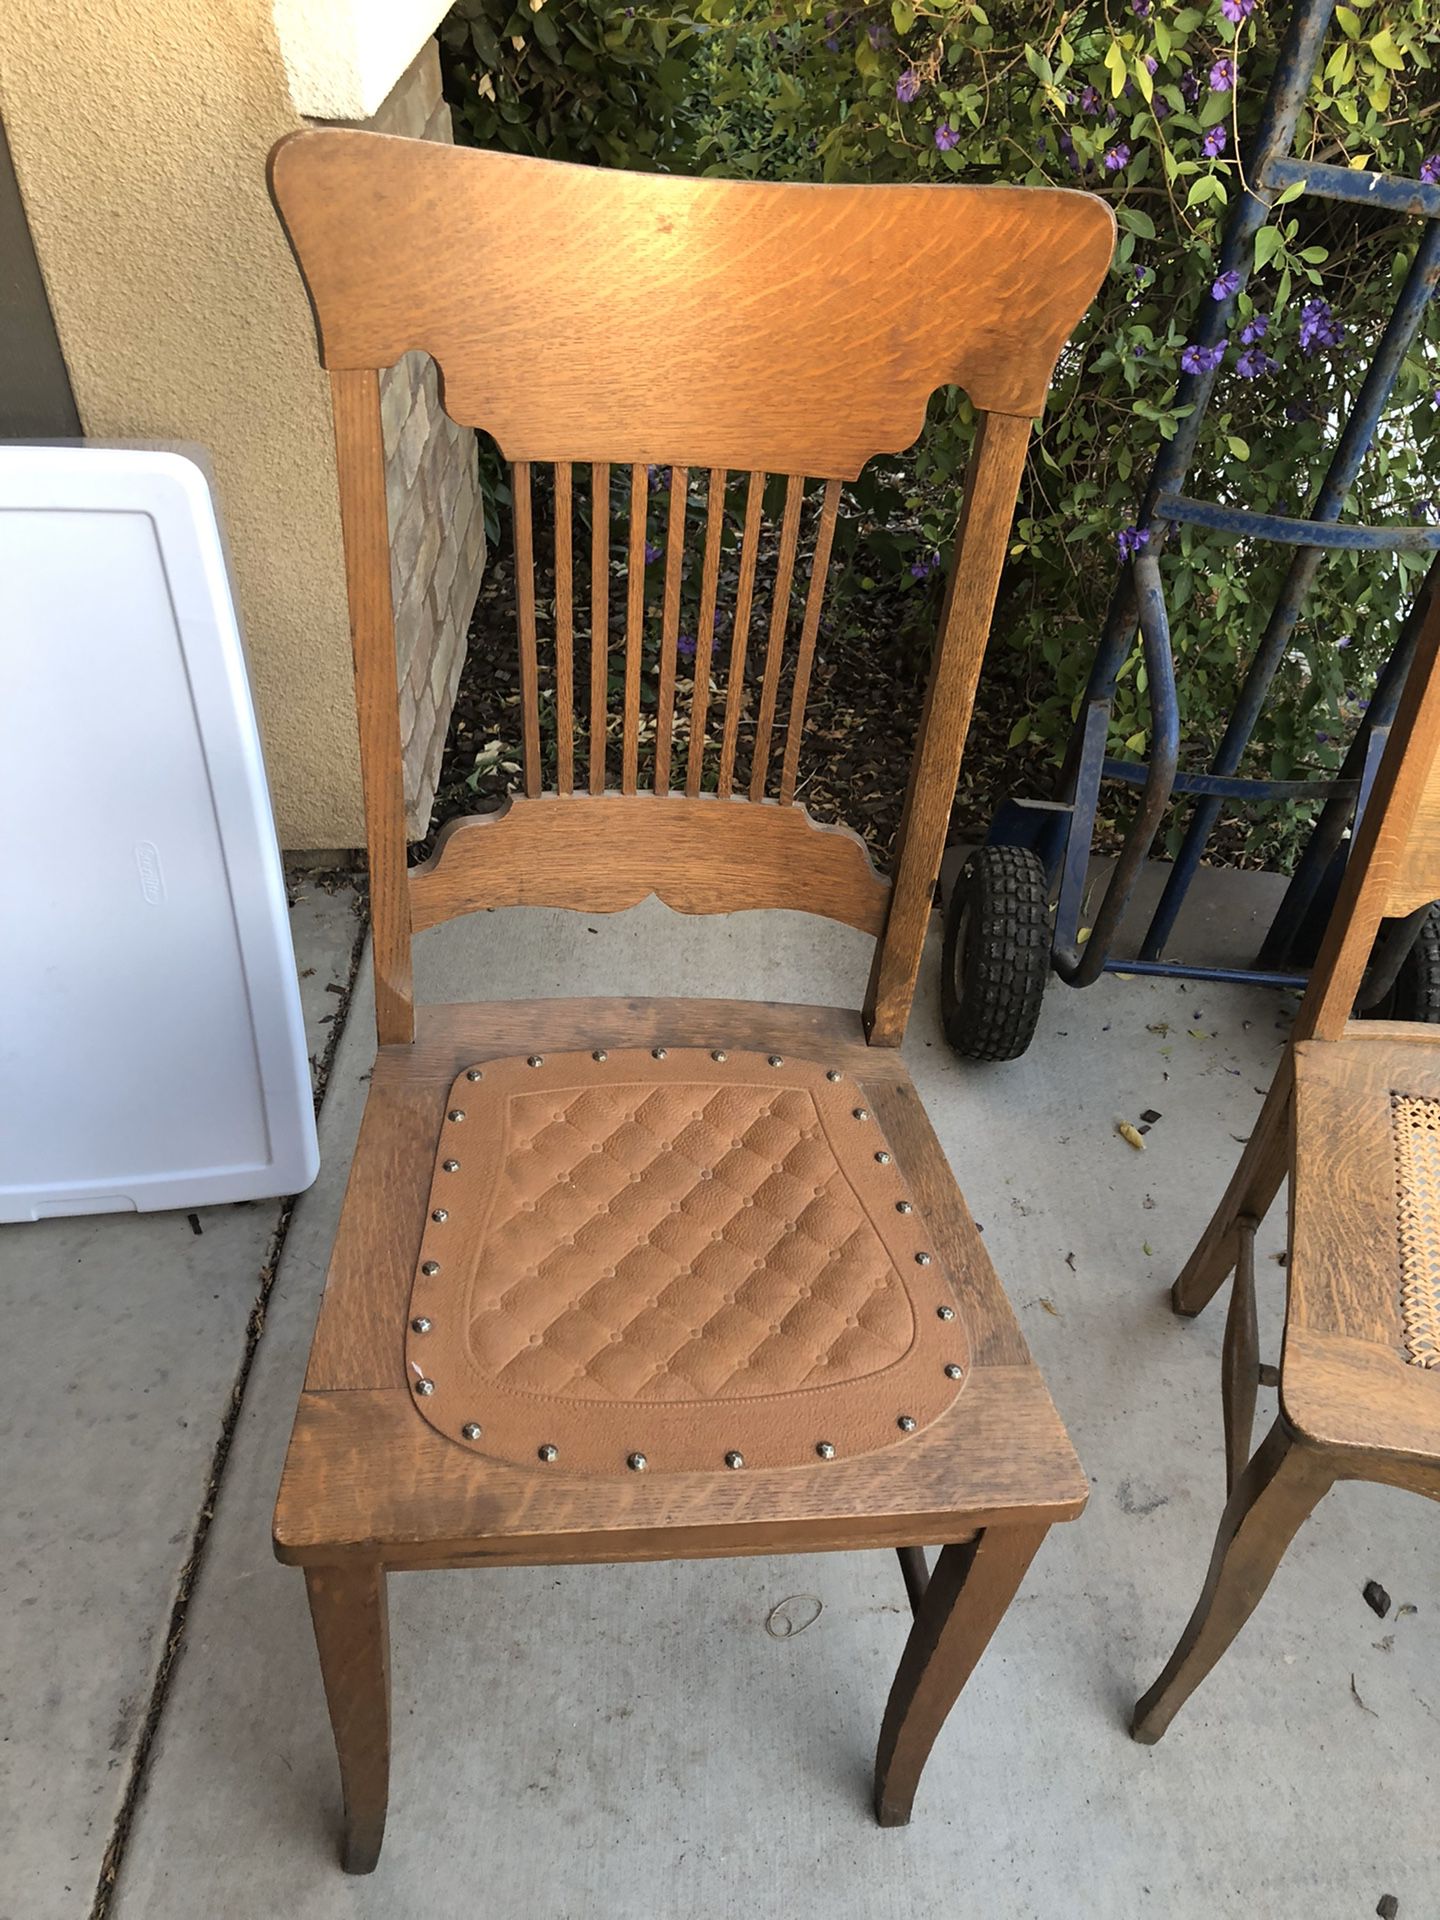 Antique chairs and table